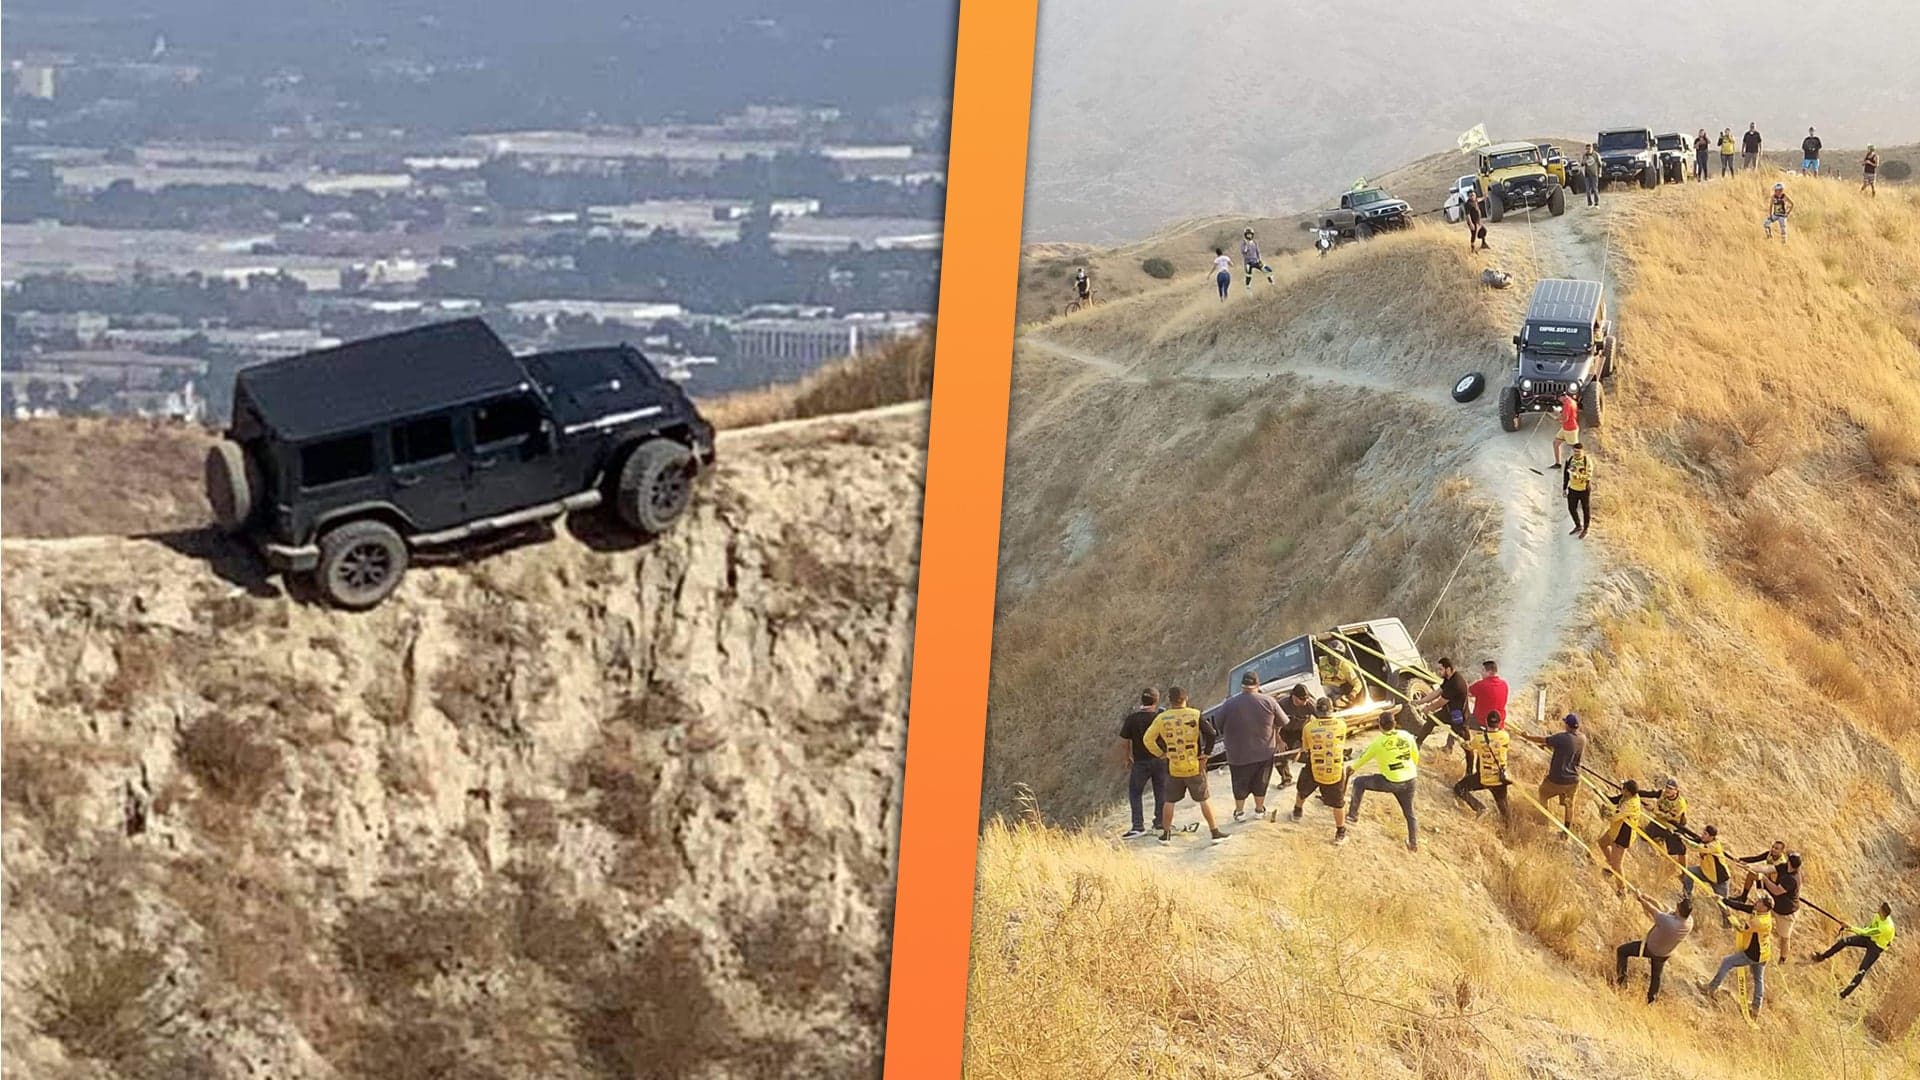 That Infamous Jeep Wrangler Stuck on a Dangerous Bike Trail Has Been Saved